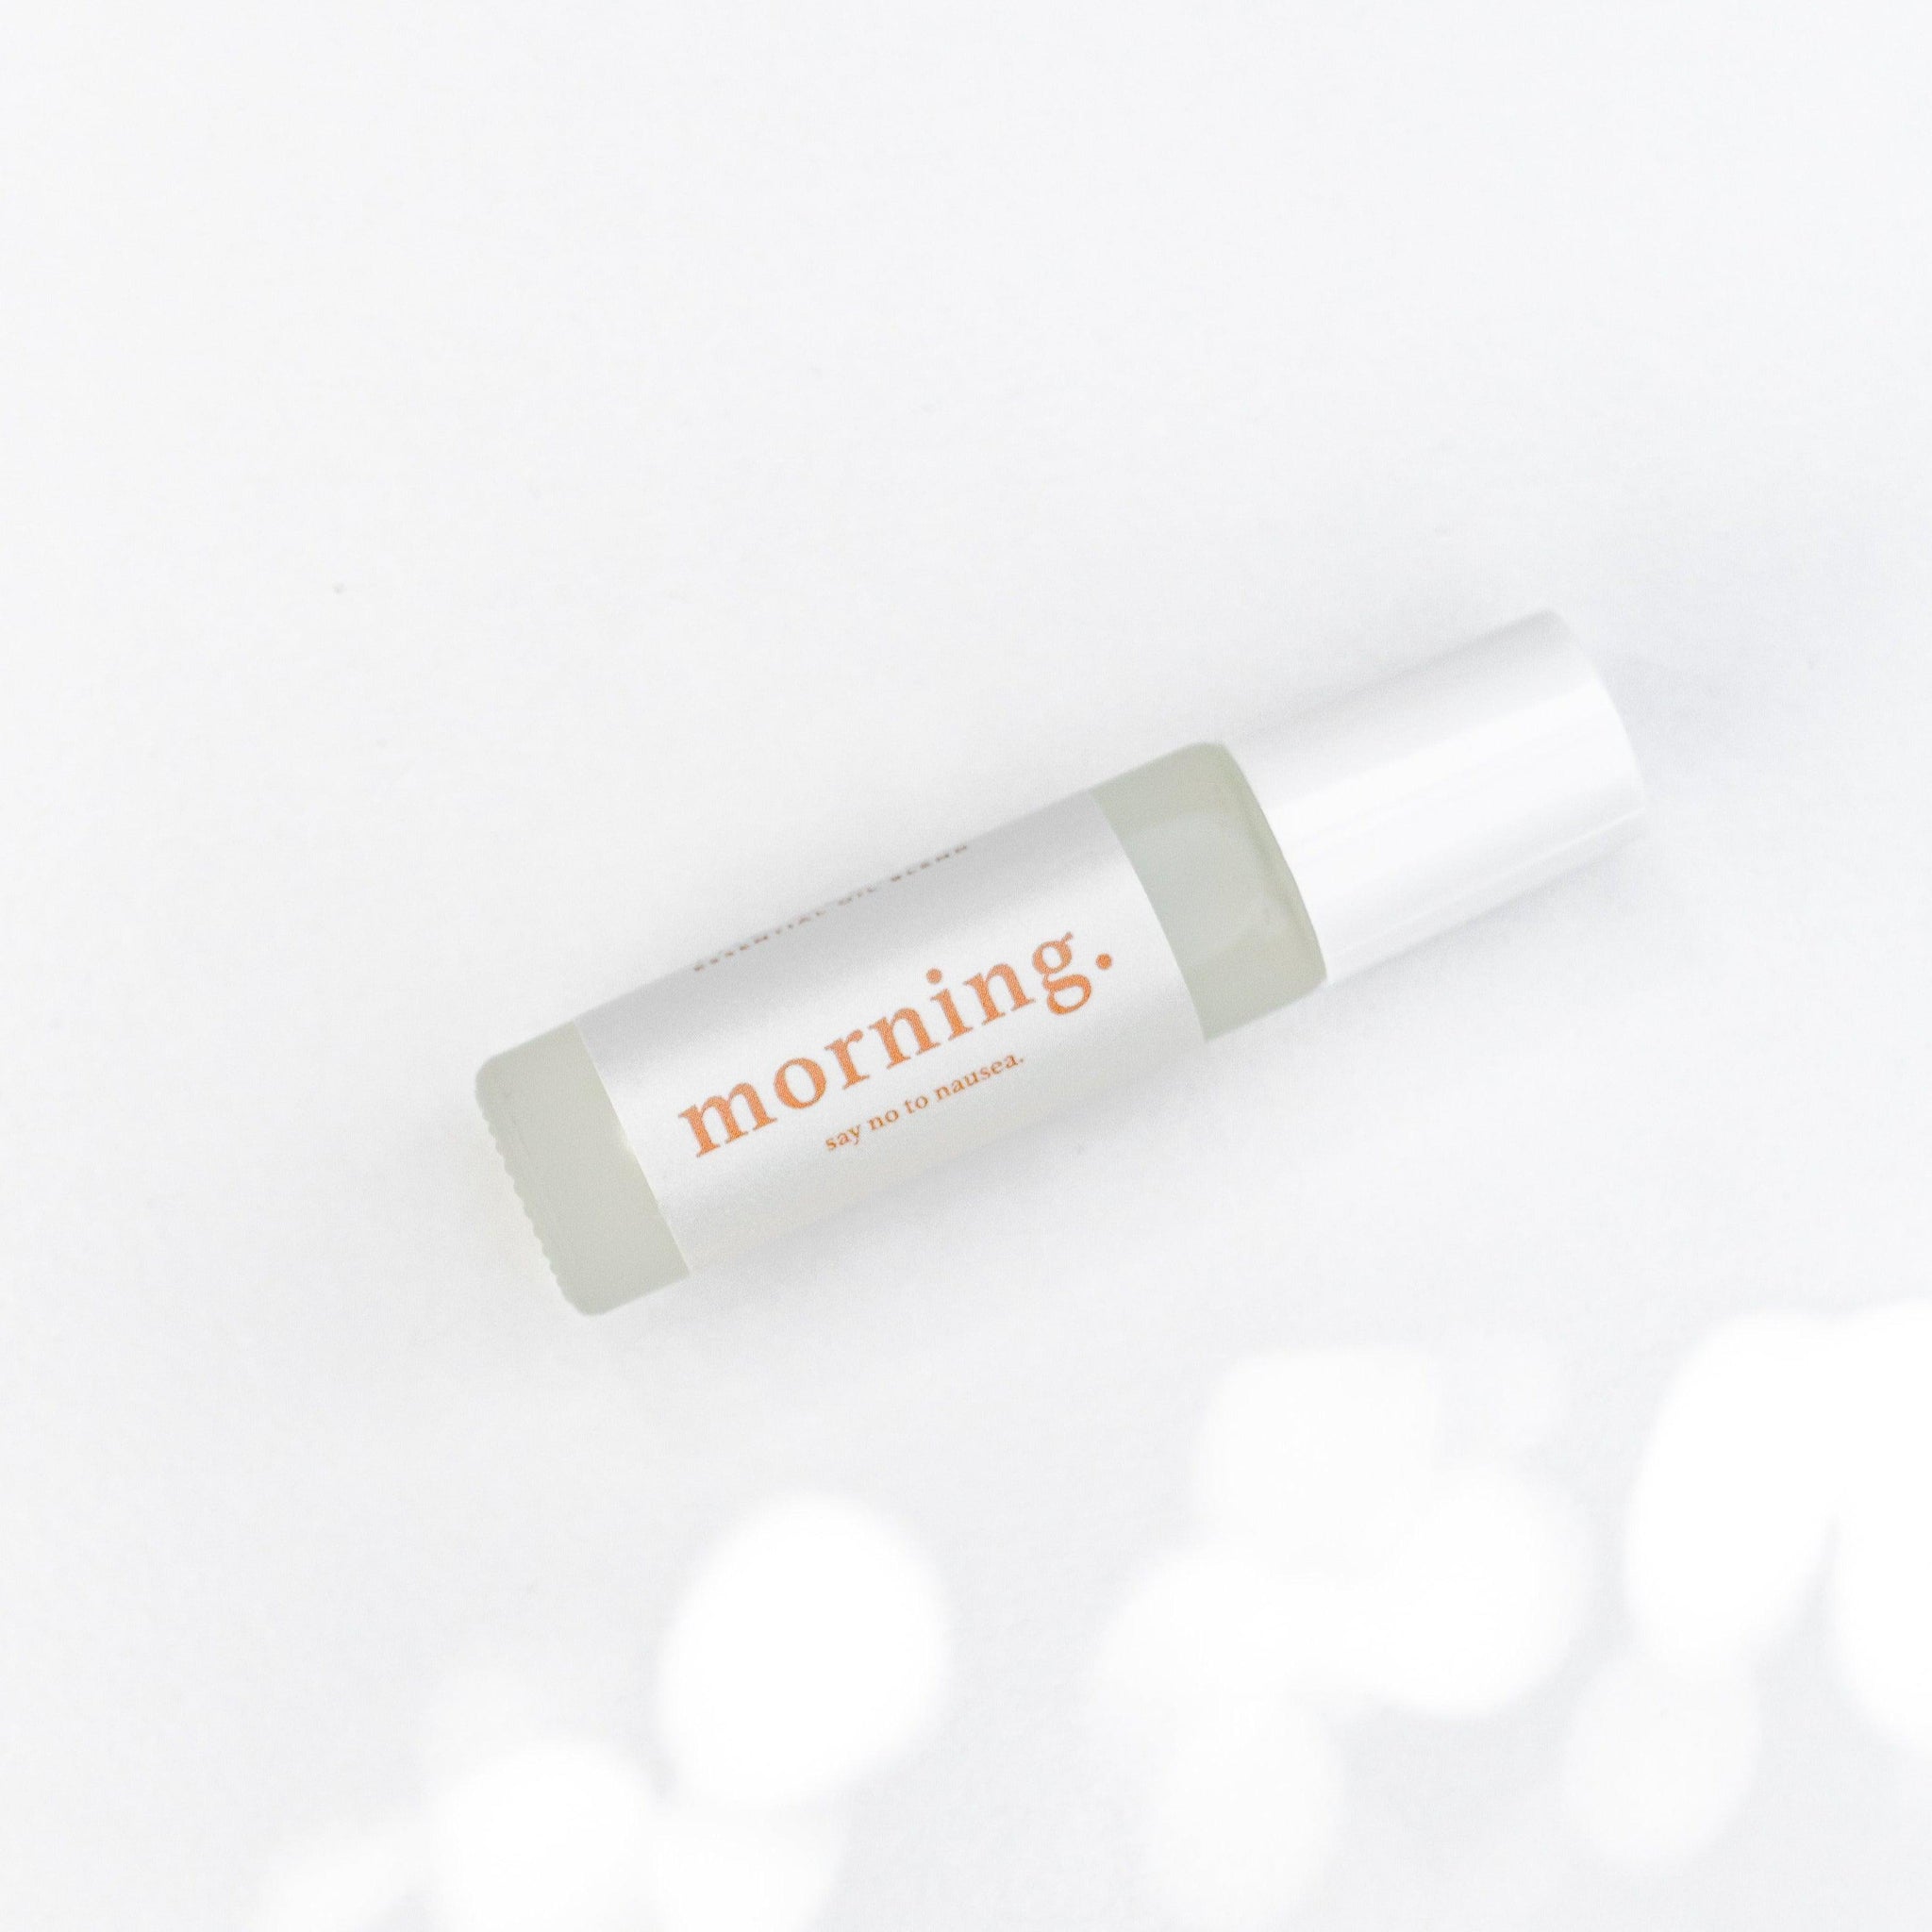 Morning essential oil blend naturally relieves nausea related to morning sickness. A safe blend designed with pregnant mamas in mind.